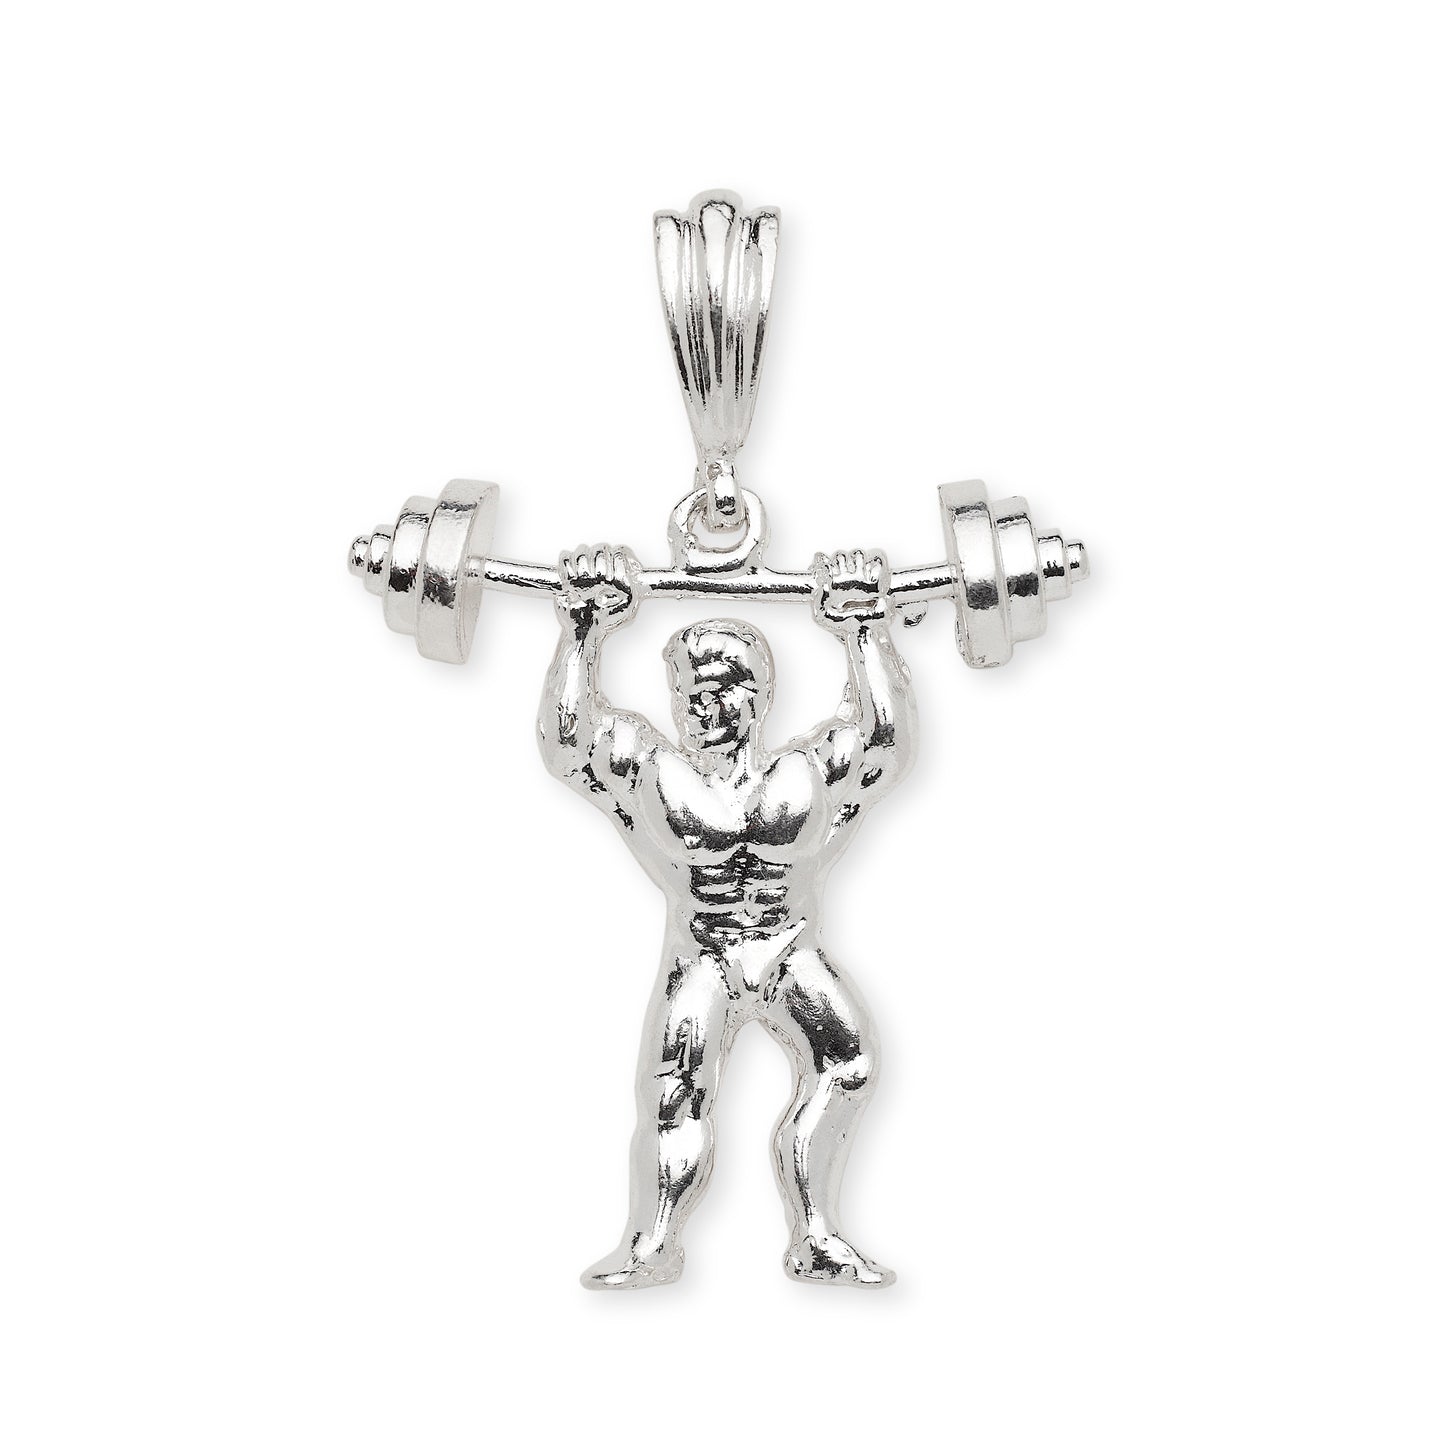 NEW!  Better Jewelry .925 Sterling Silver Bodybuilder Muscular Male Barbell Sports Vintage Charm Pendant